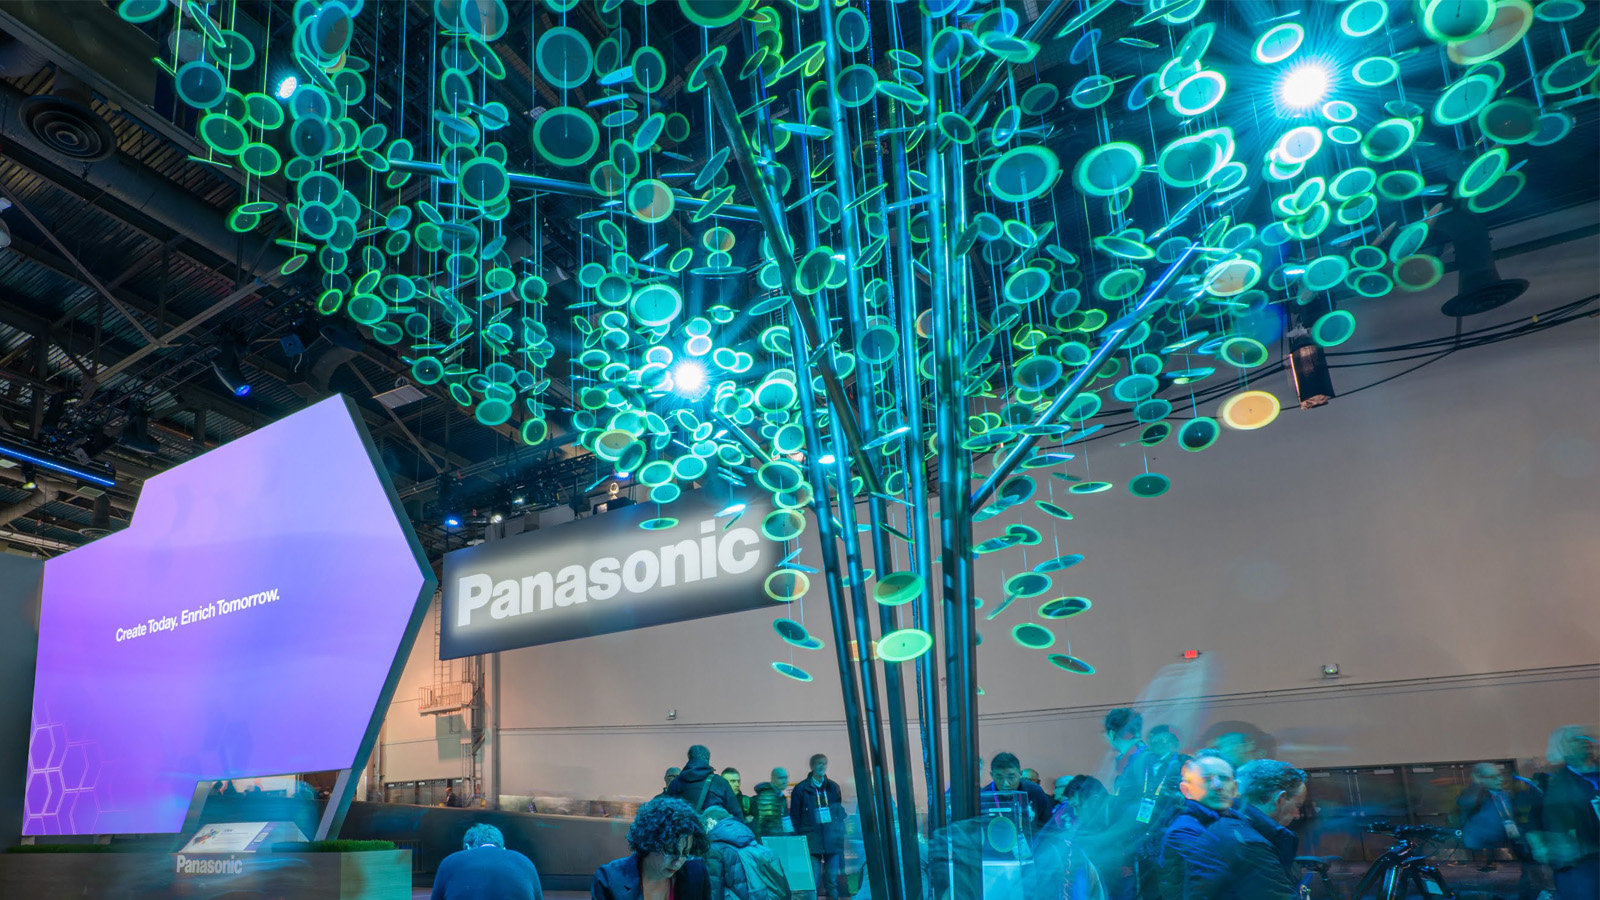 Photo: Panasonic’s “Perovskite Tree” exhibit at CES 2023 demonstrated the flexibility of the material through “leaves” made of nearly 1,000 mockup circular perovskite cells